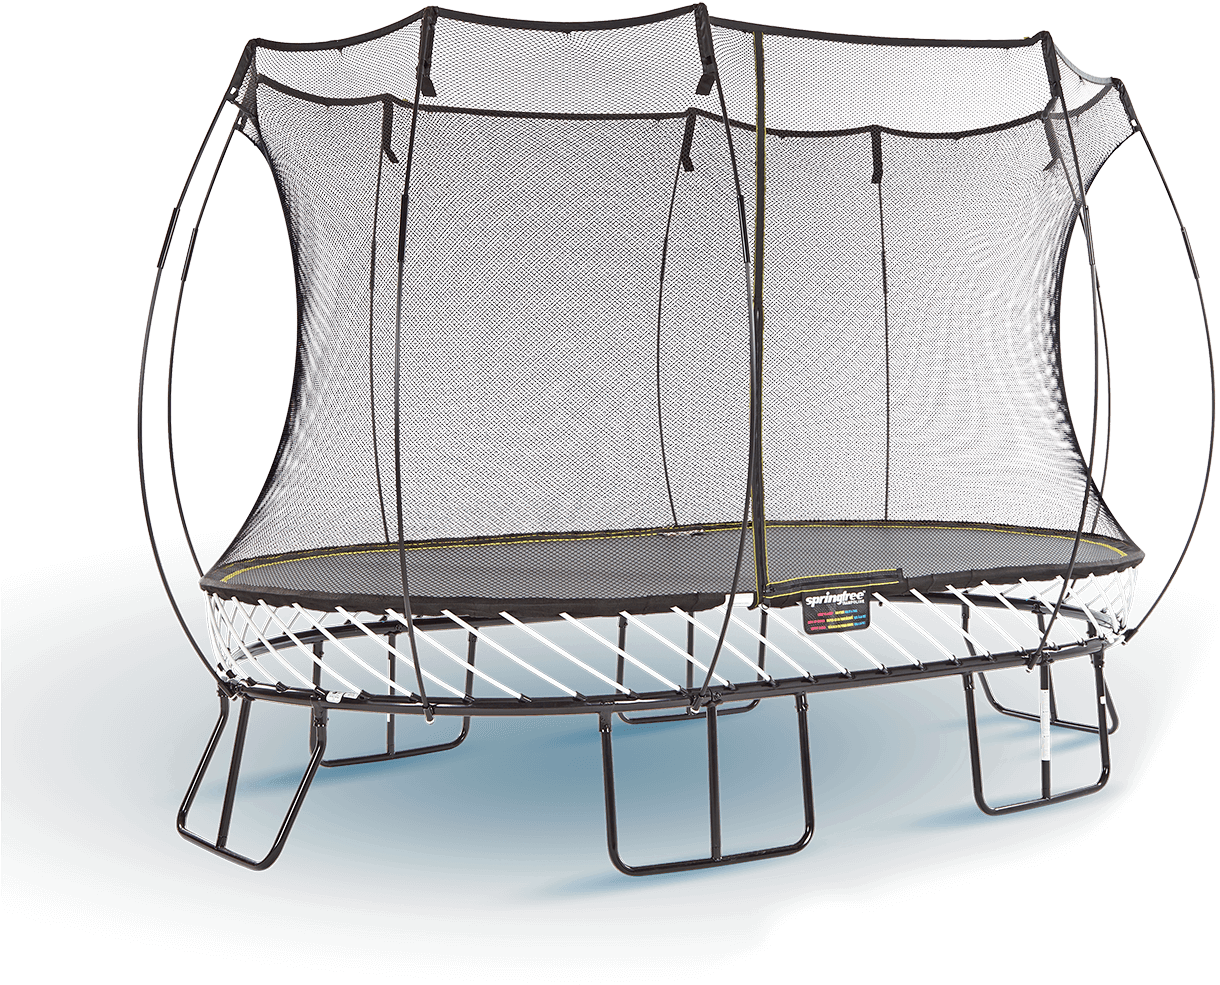 A Trampoline With A Net